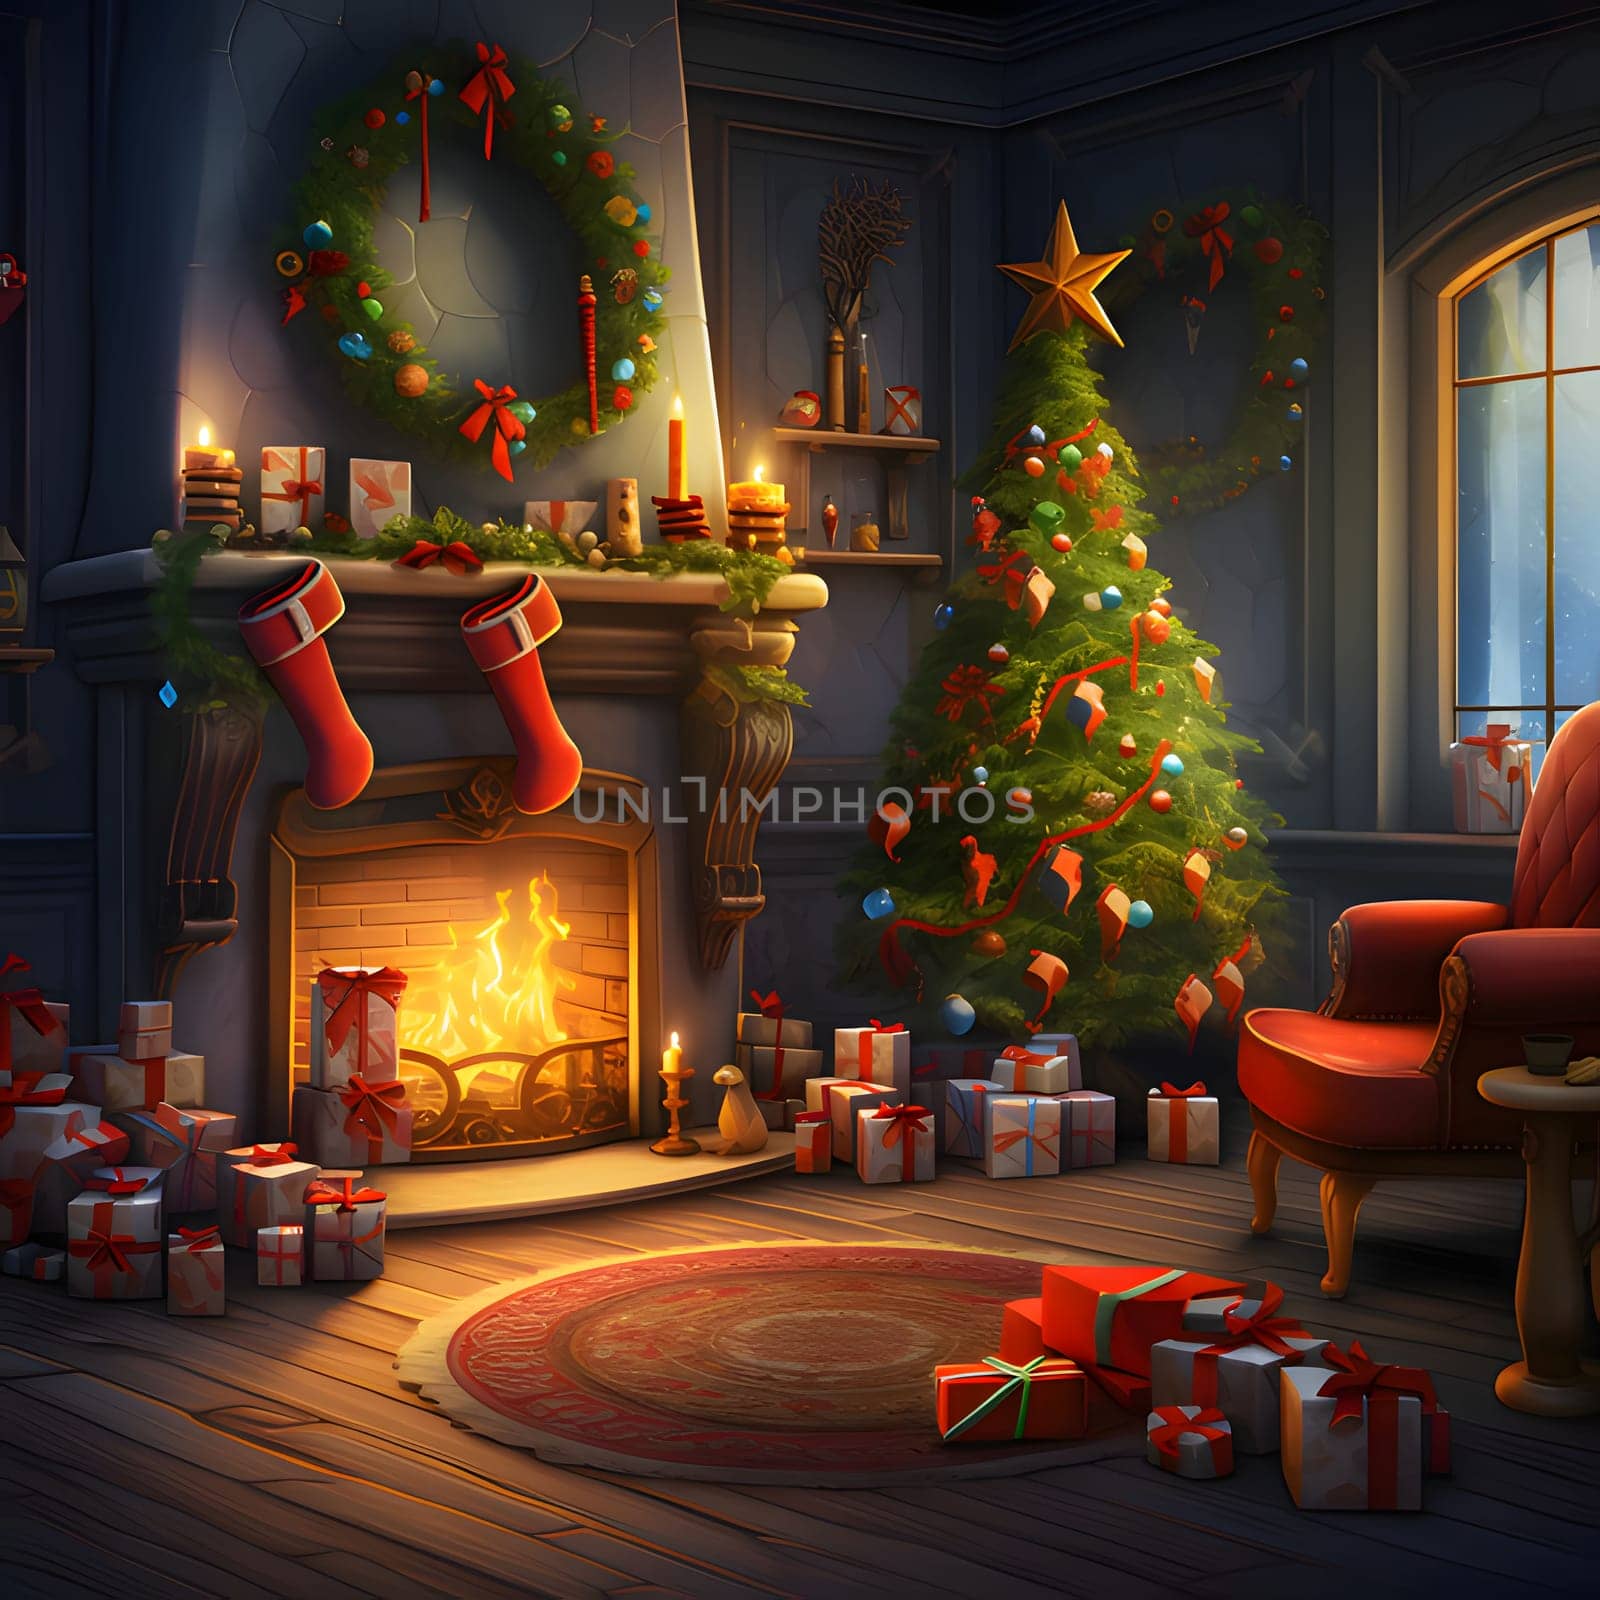 Illustration of a room with a Christmas tree, mass, presents, wreath and fireplace. Xmas tree as a symbol of Christmas of the birth of the Savior. A time of joy and celebration.